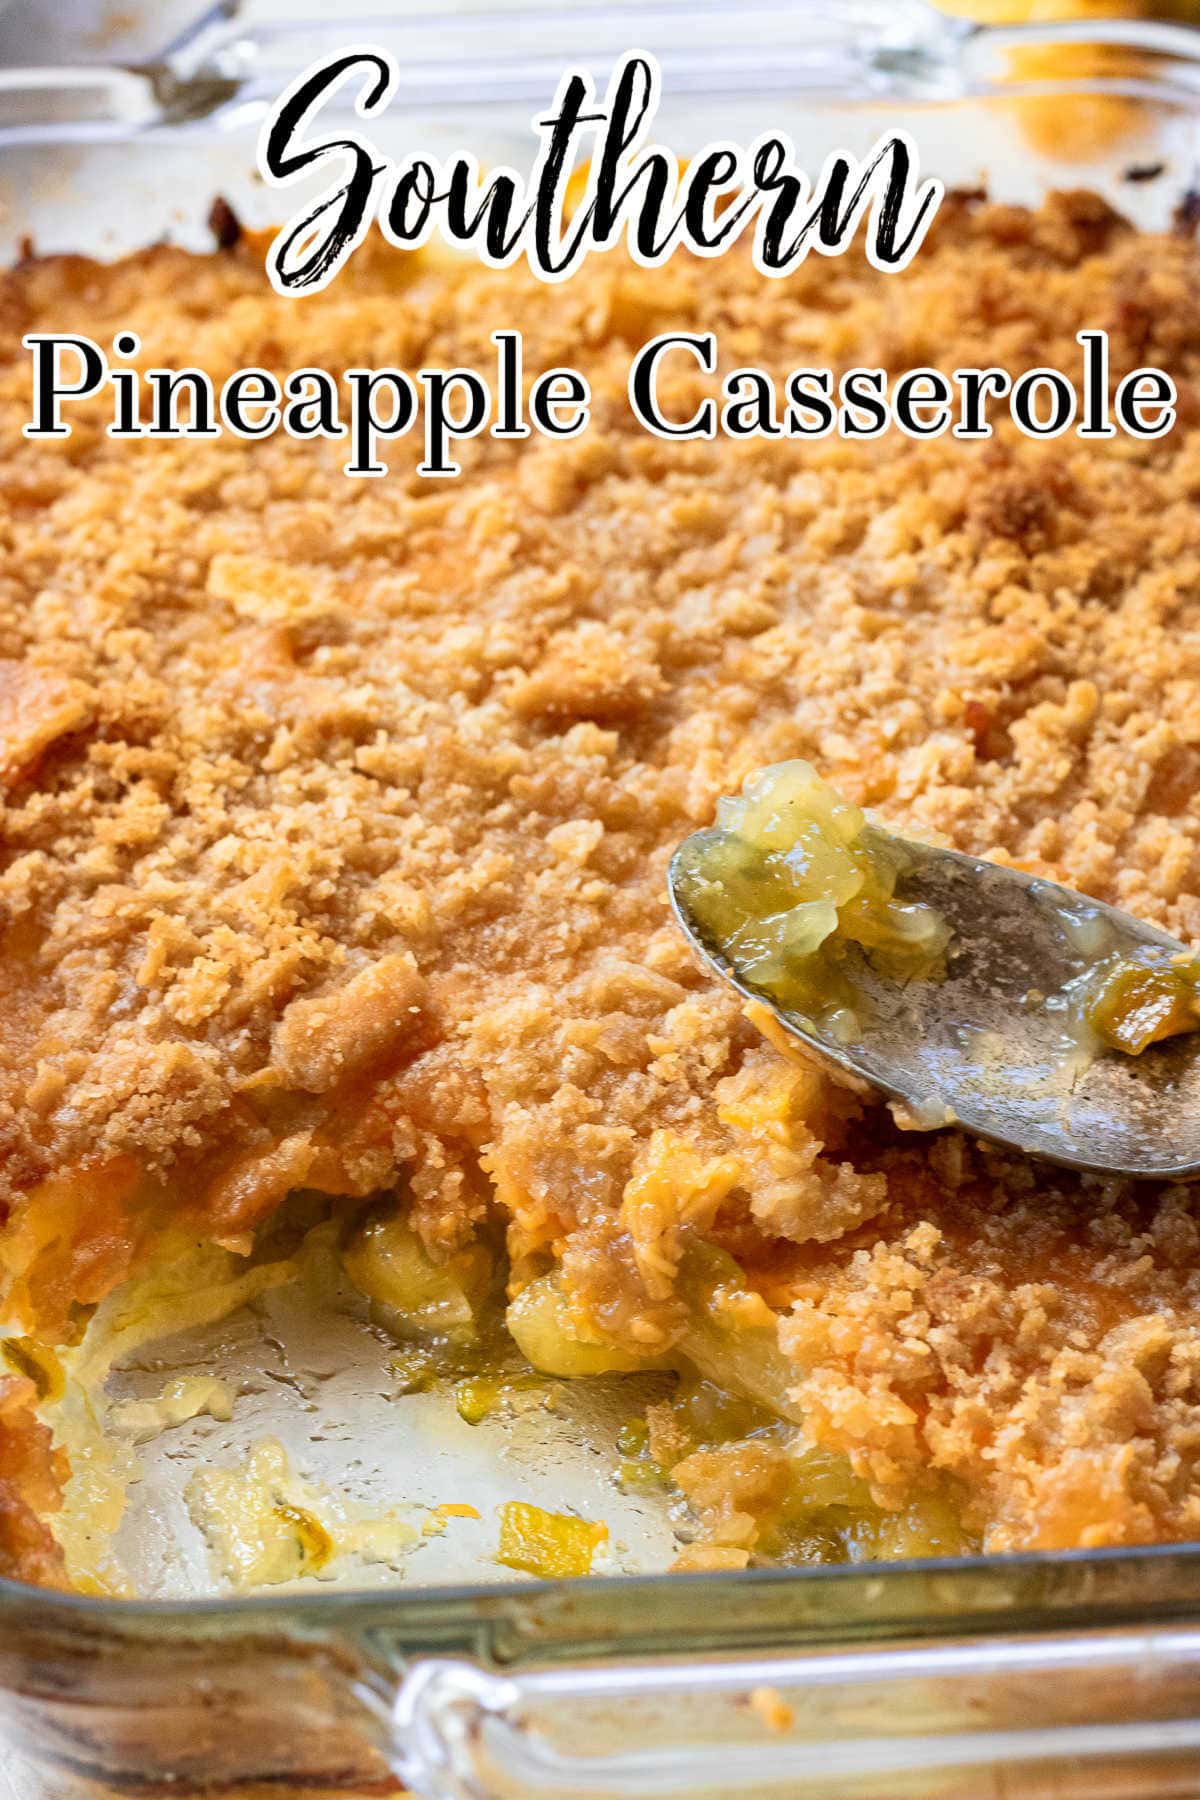 Closeup of pineapple casserole with cheese. A spoon is lying on top.